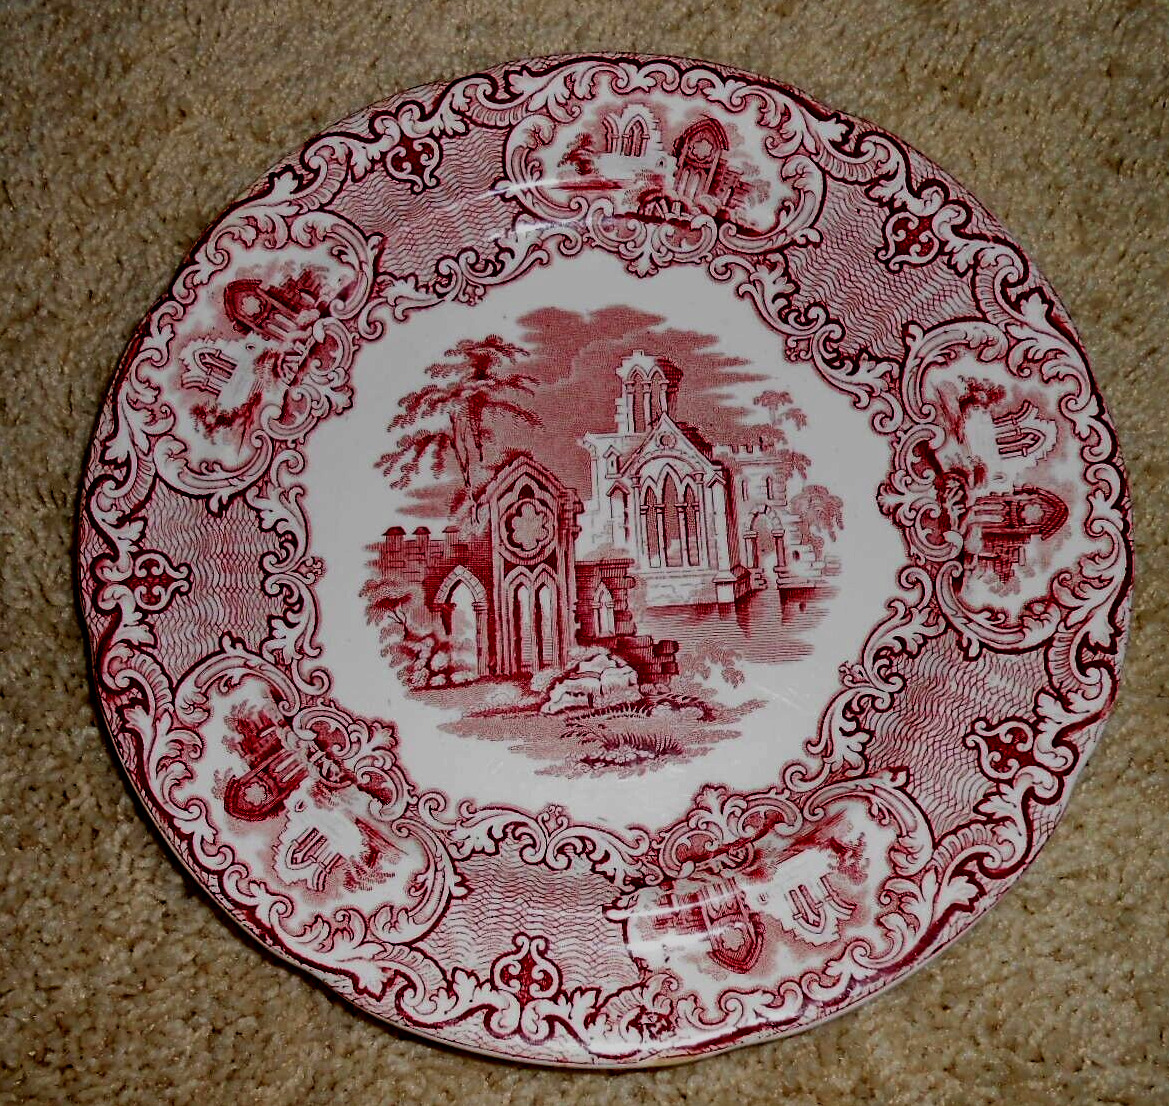 Abbey George Jones Antique Red Staffordshire Plate 1861-1873